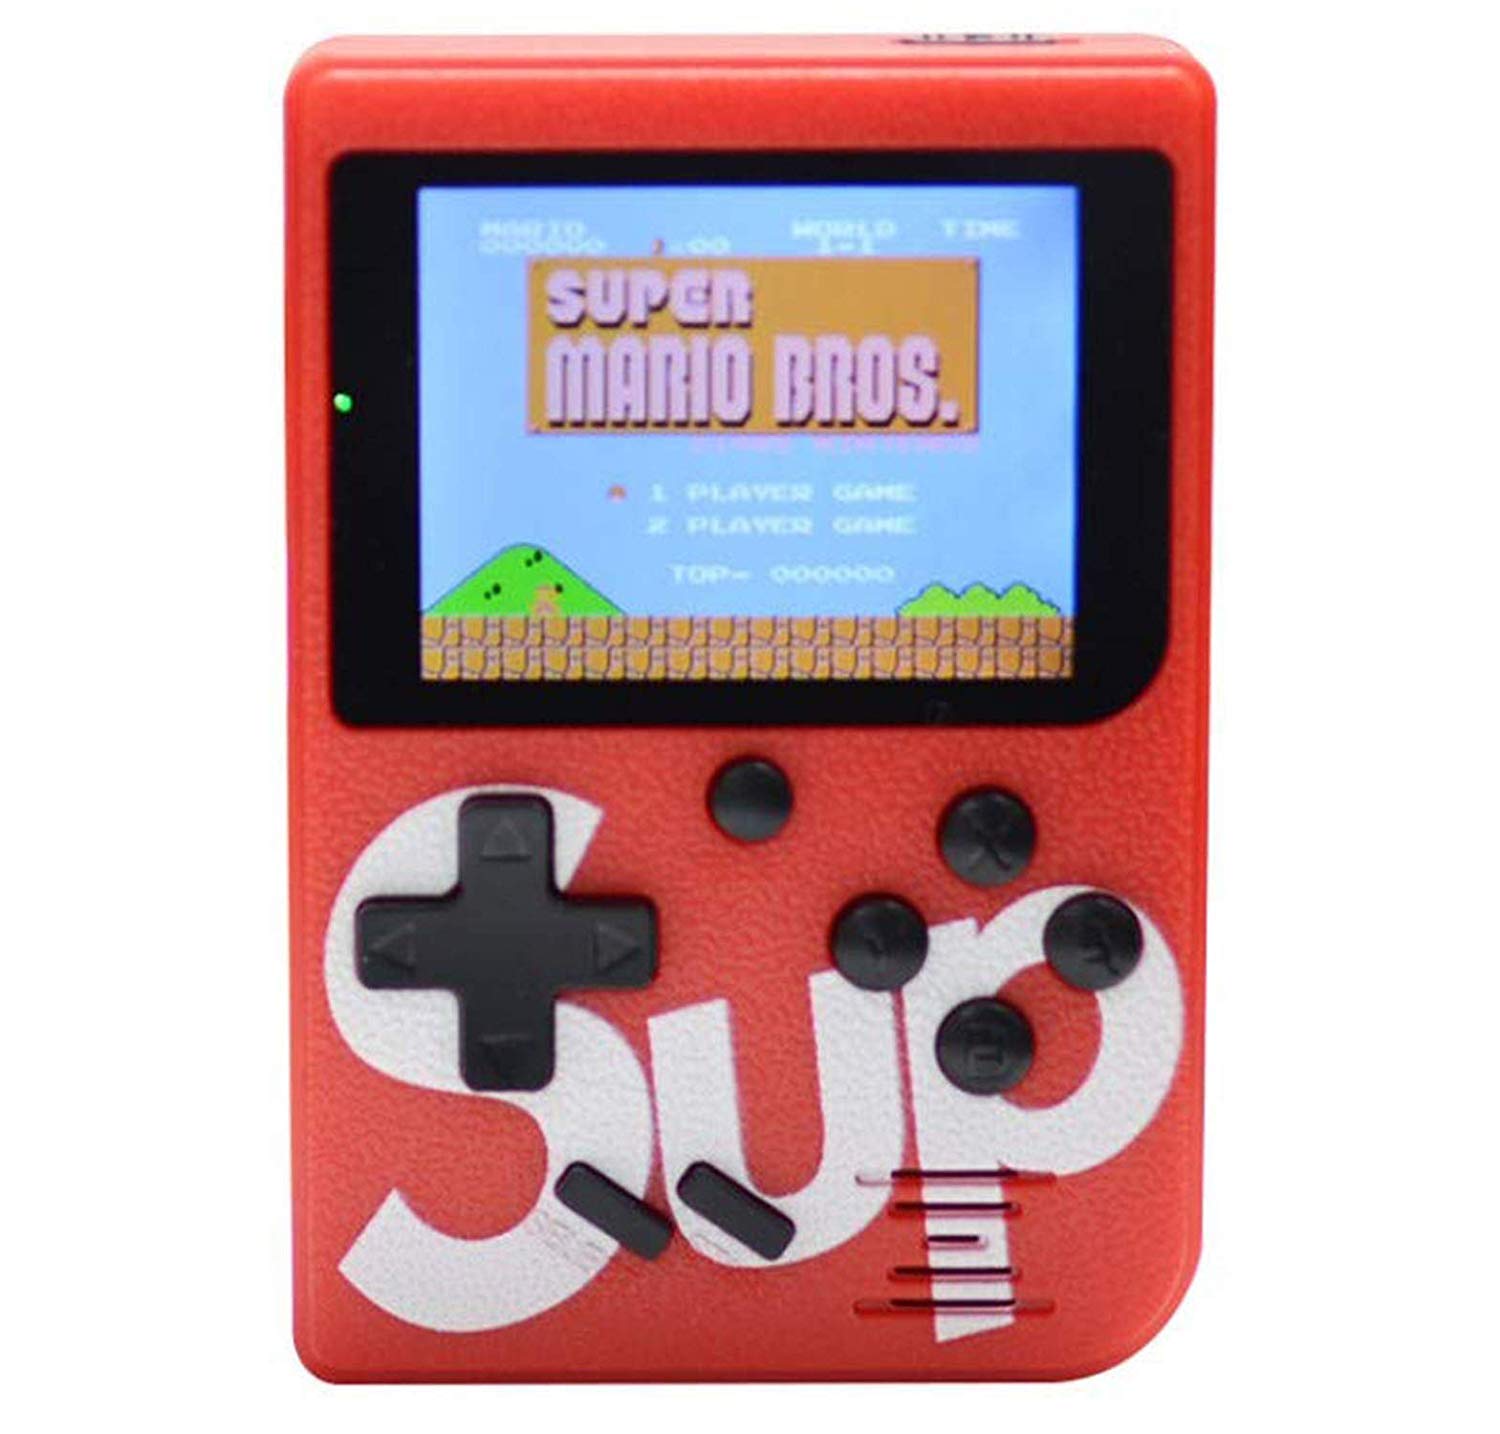 game boy sup 400 in 1